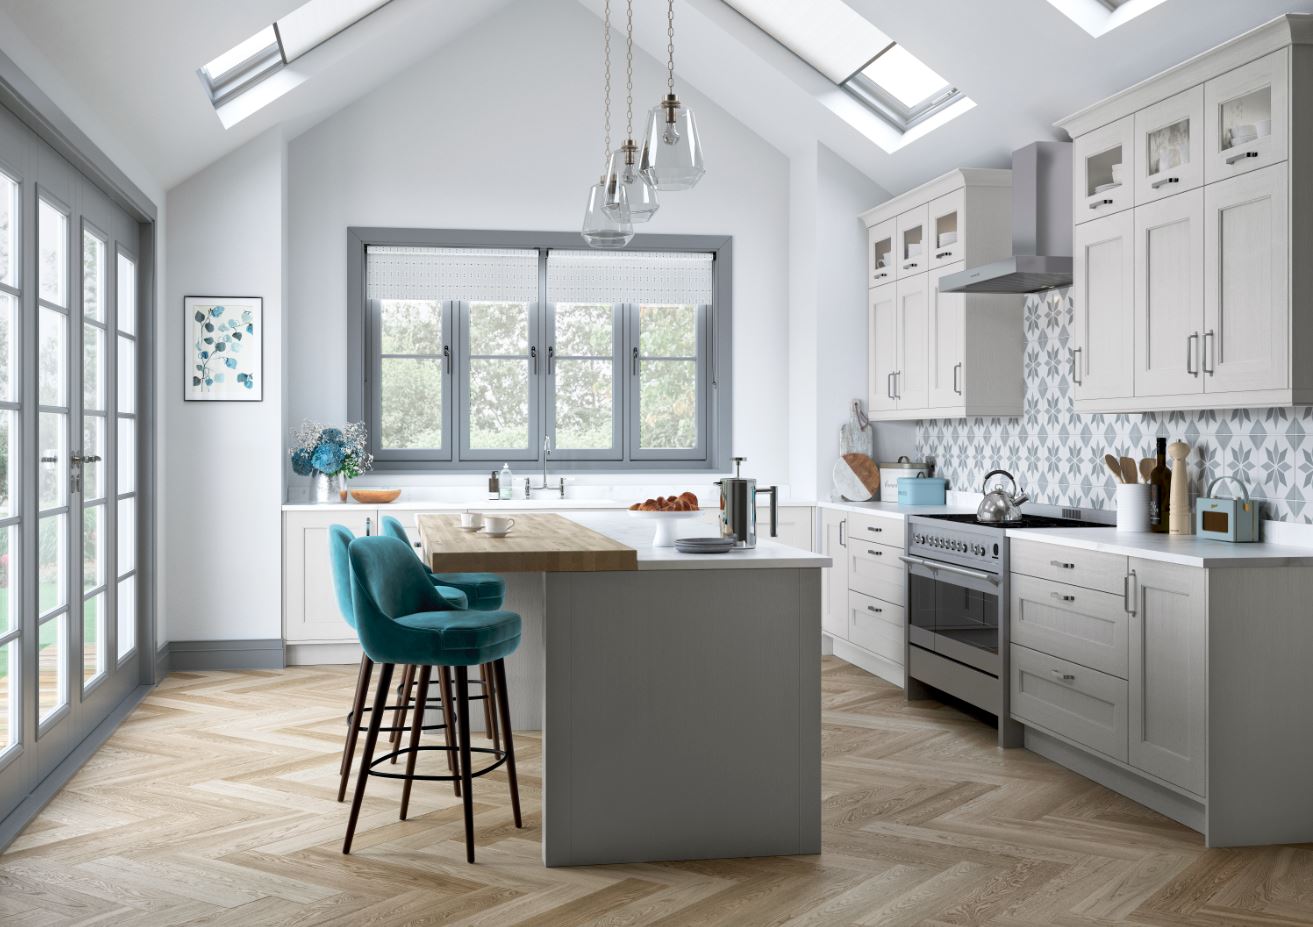 Changing Kitchen Doors Check Out Noyeks Newmans Stunning Ranges Houseandhome Ie